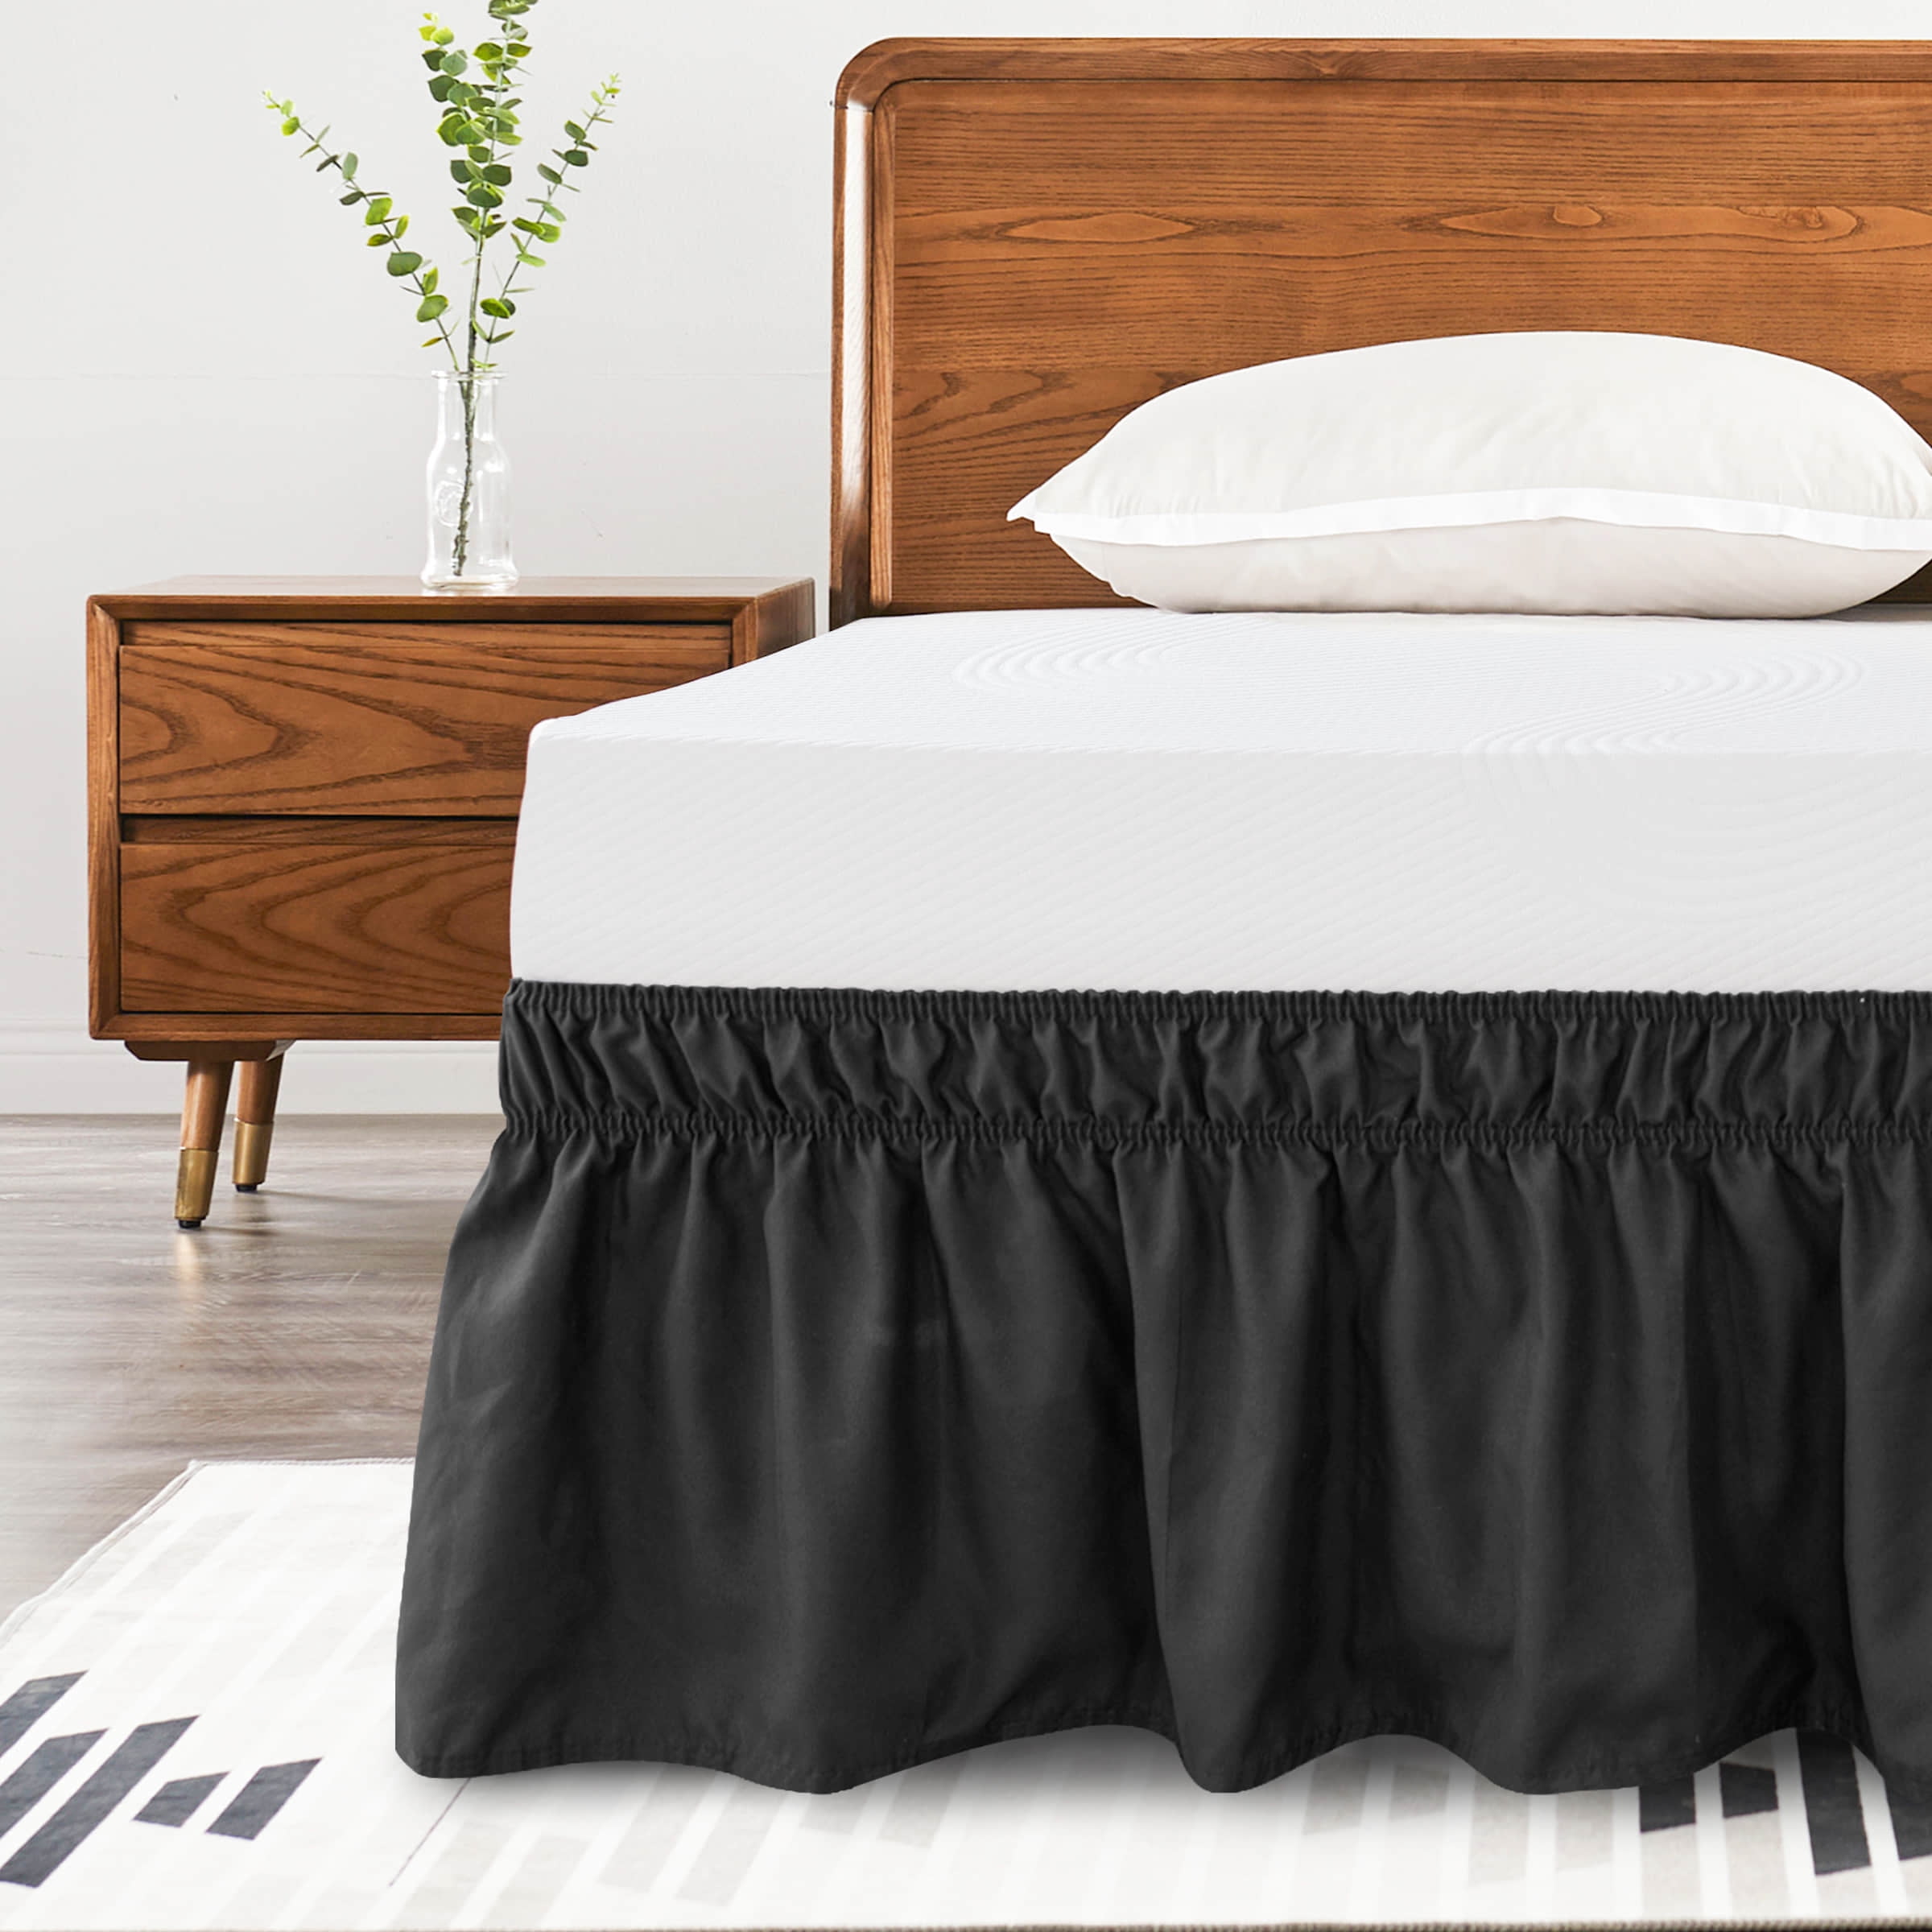 Subrtex Bed Skirt Wrap-Around Dust Ruffle Elastic 16 Inch Bed Cover, King,  Black 